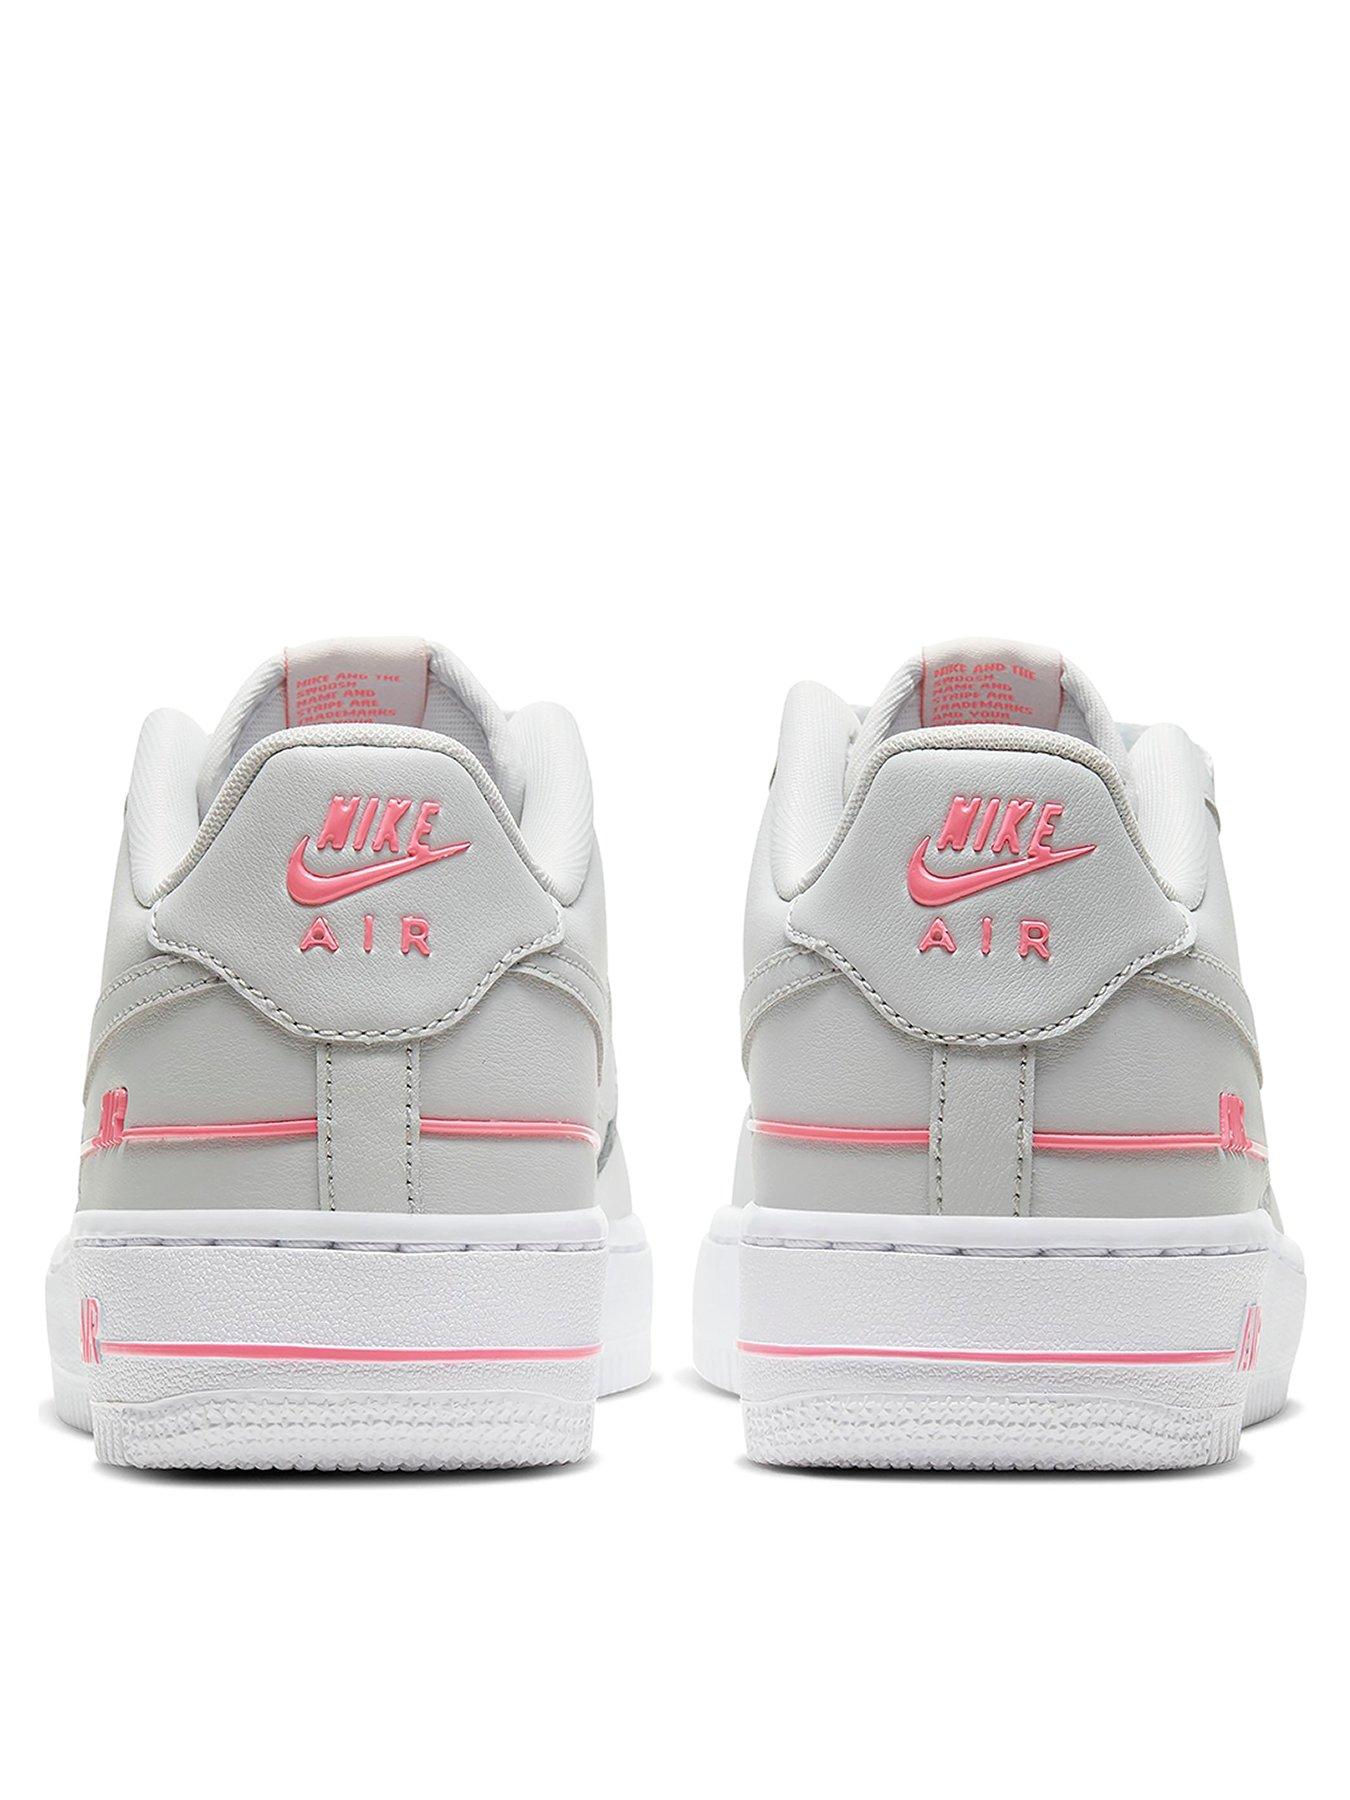 white and pink air force 1 junior